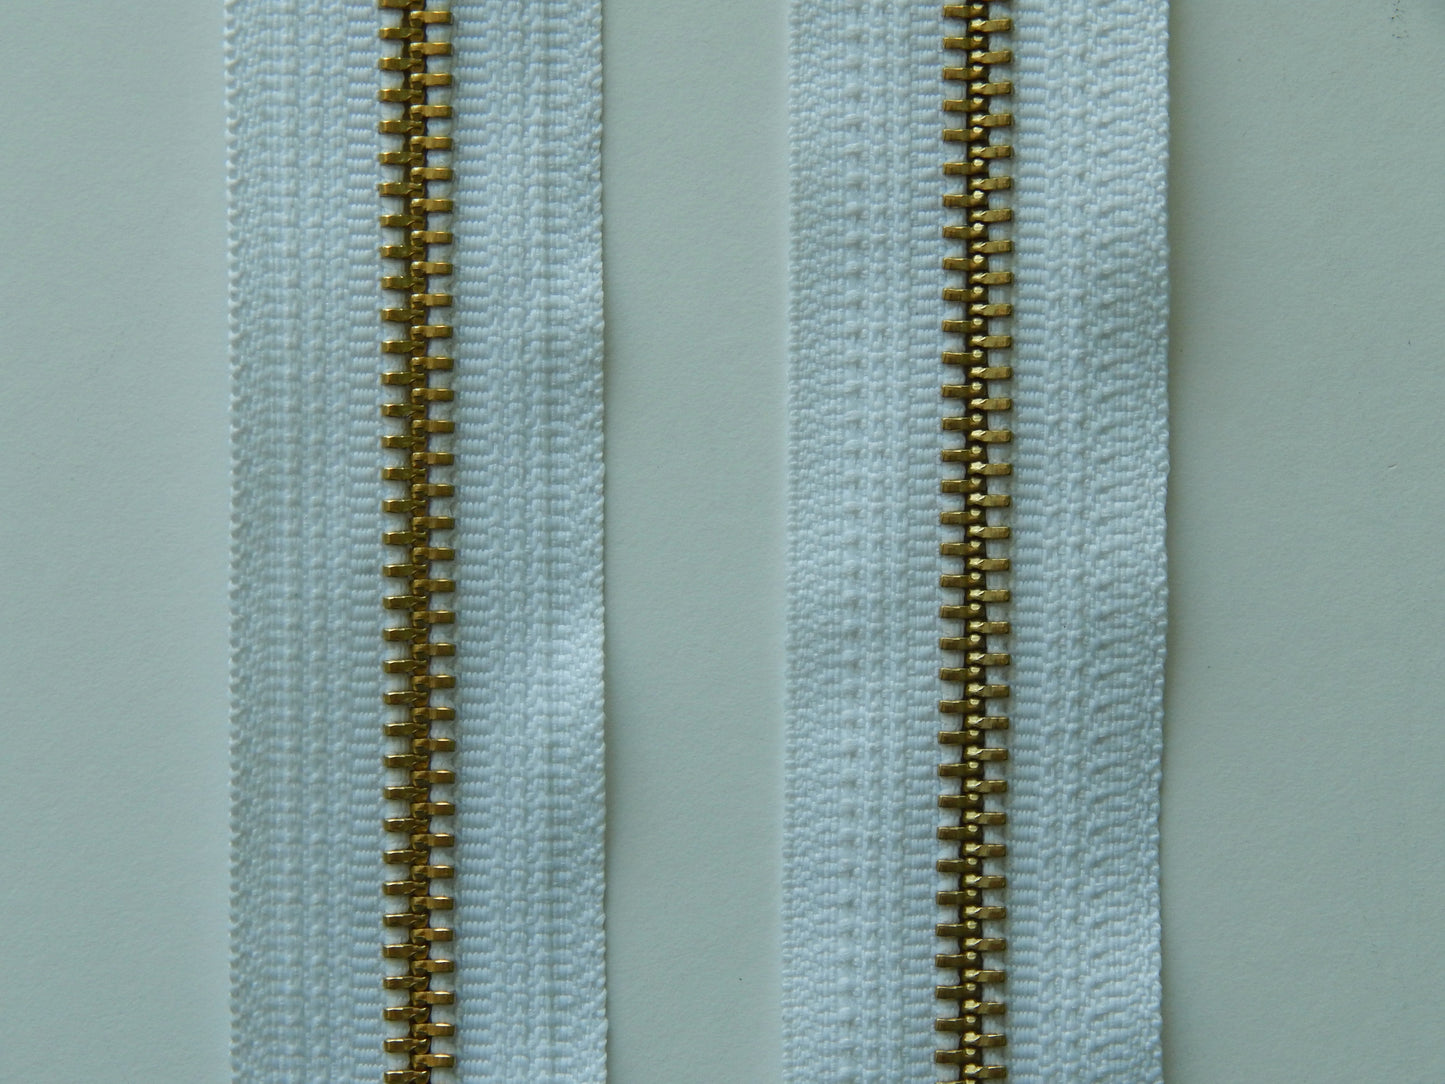 white and gold zippers